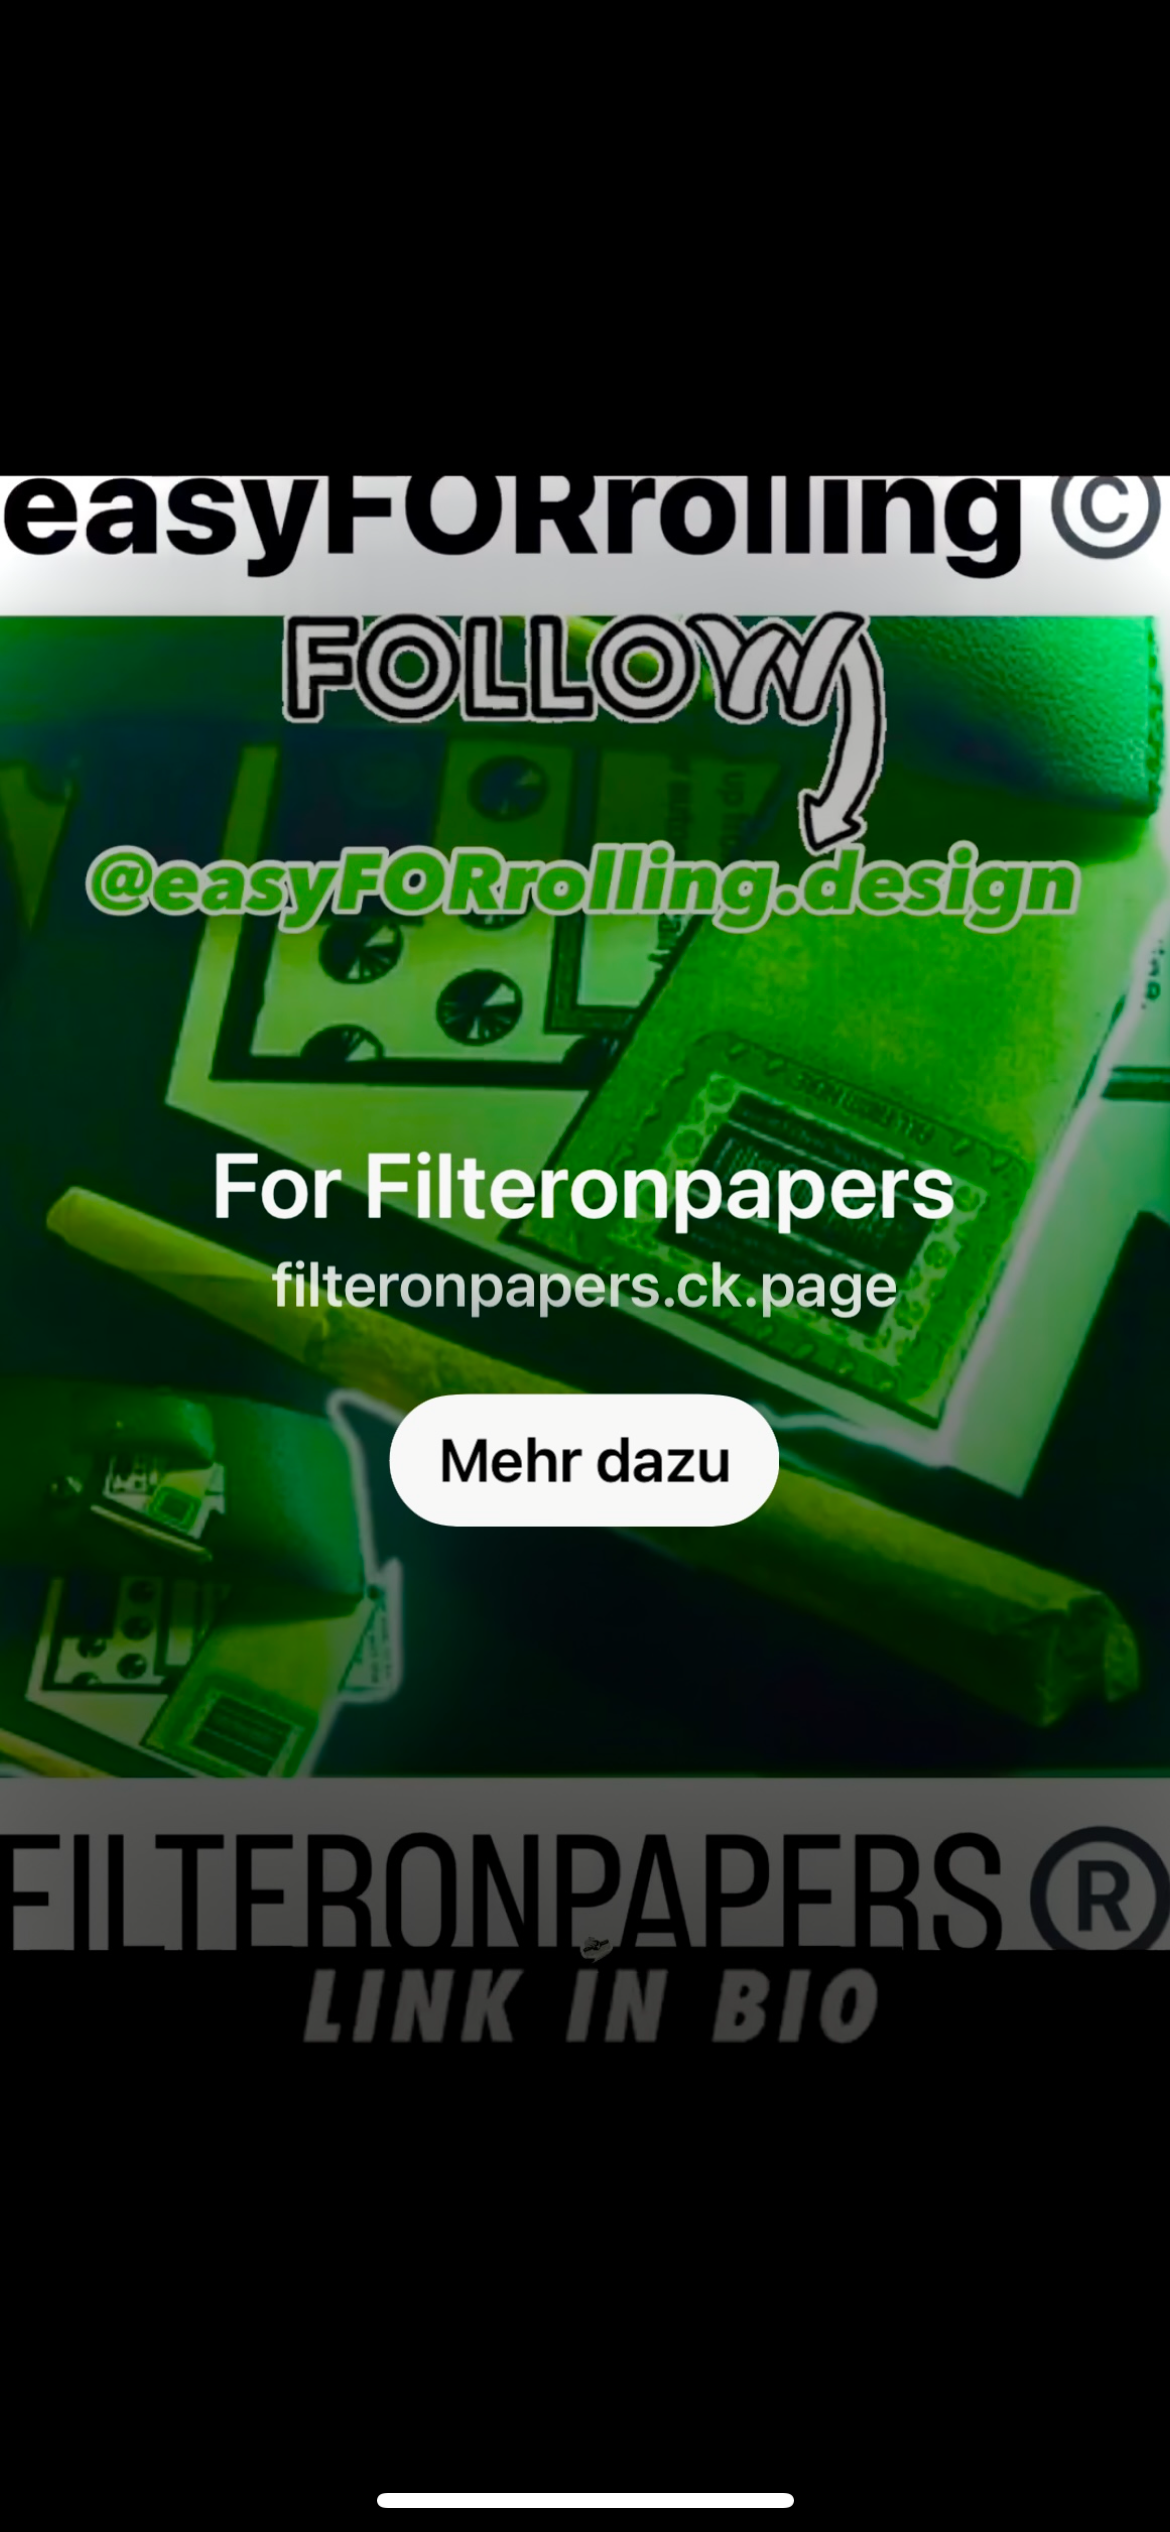 3er FilterOnpapeRs®️ SOFTLAUNCH edition